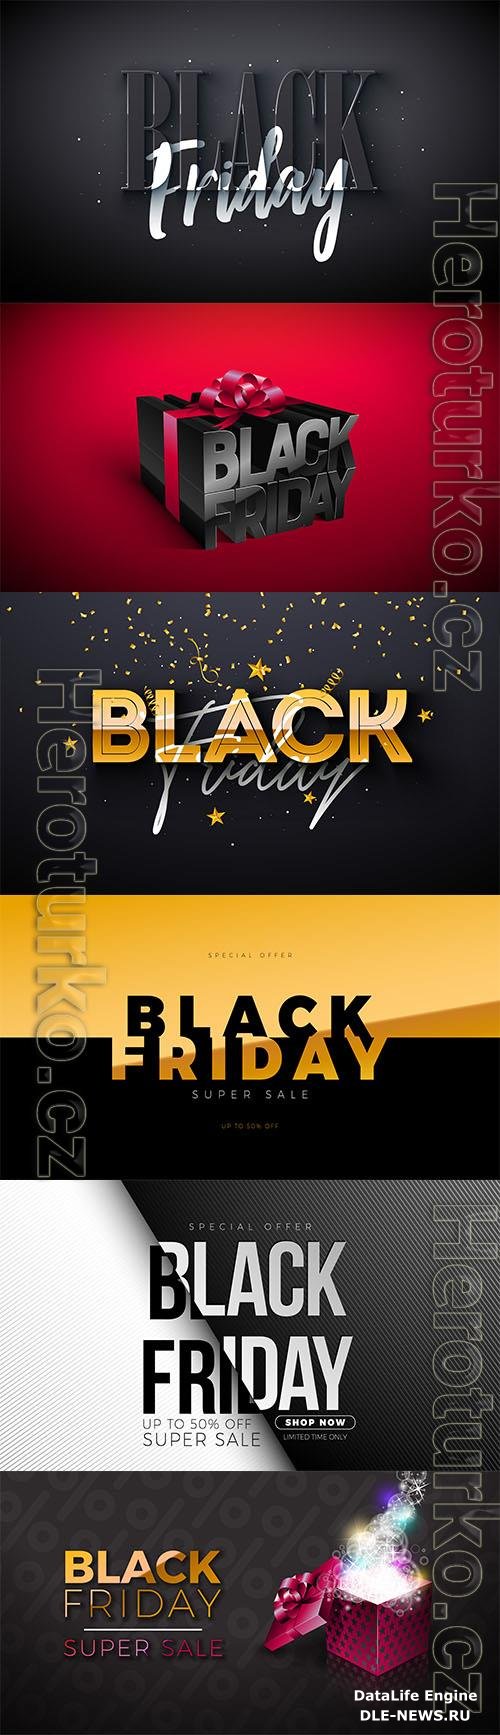 Vector black friday sale design with glowing light lettering